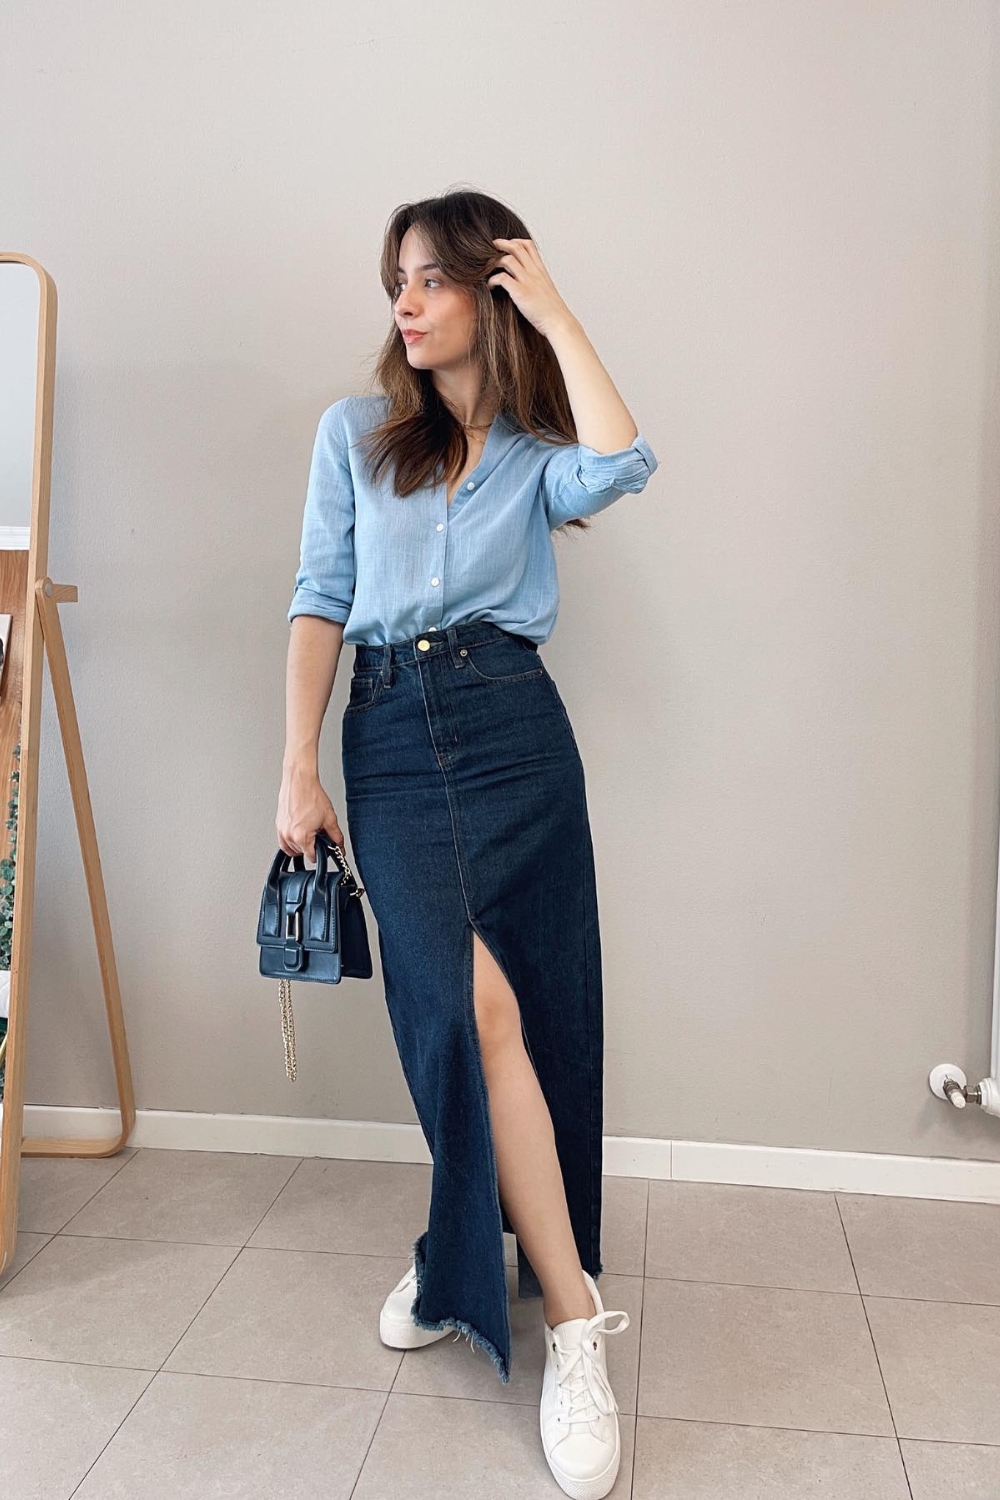 Casual Spring Outfit Ideas - Denim Shirt and Skirt